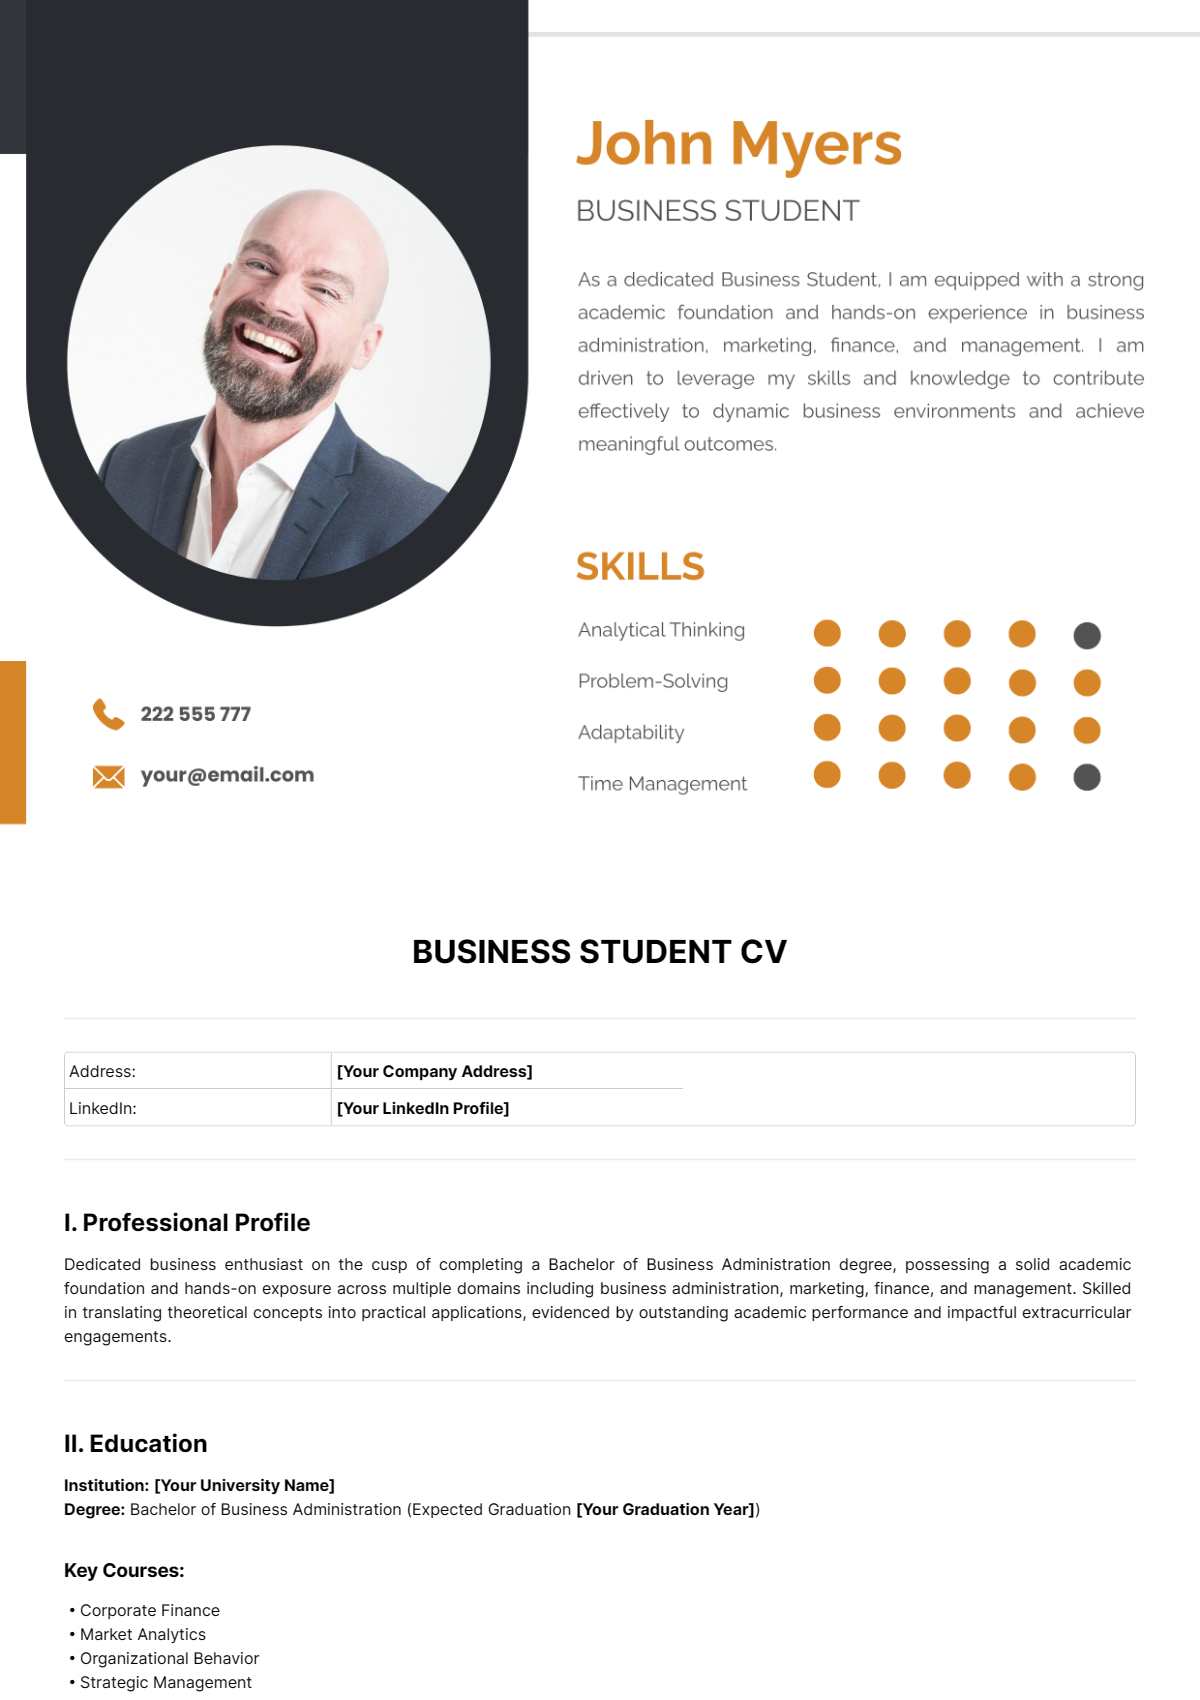 Free Business Student CV Template